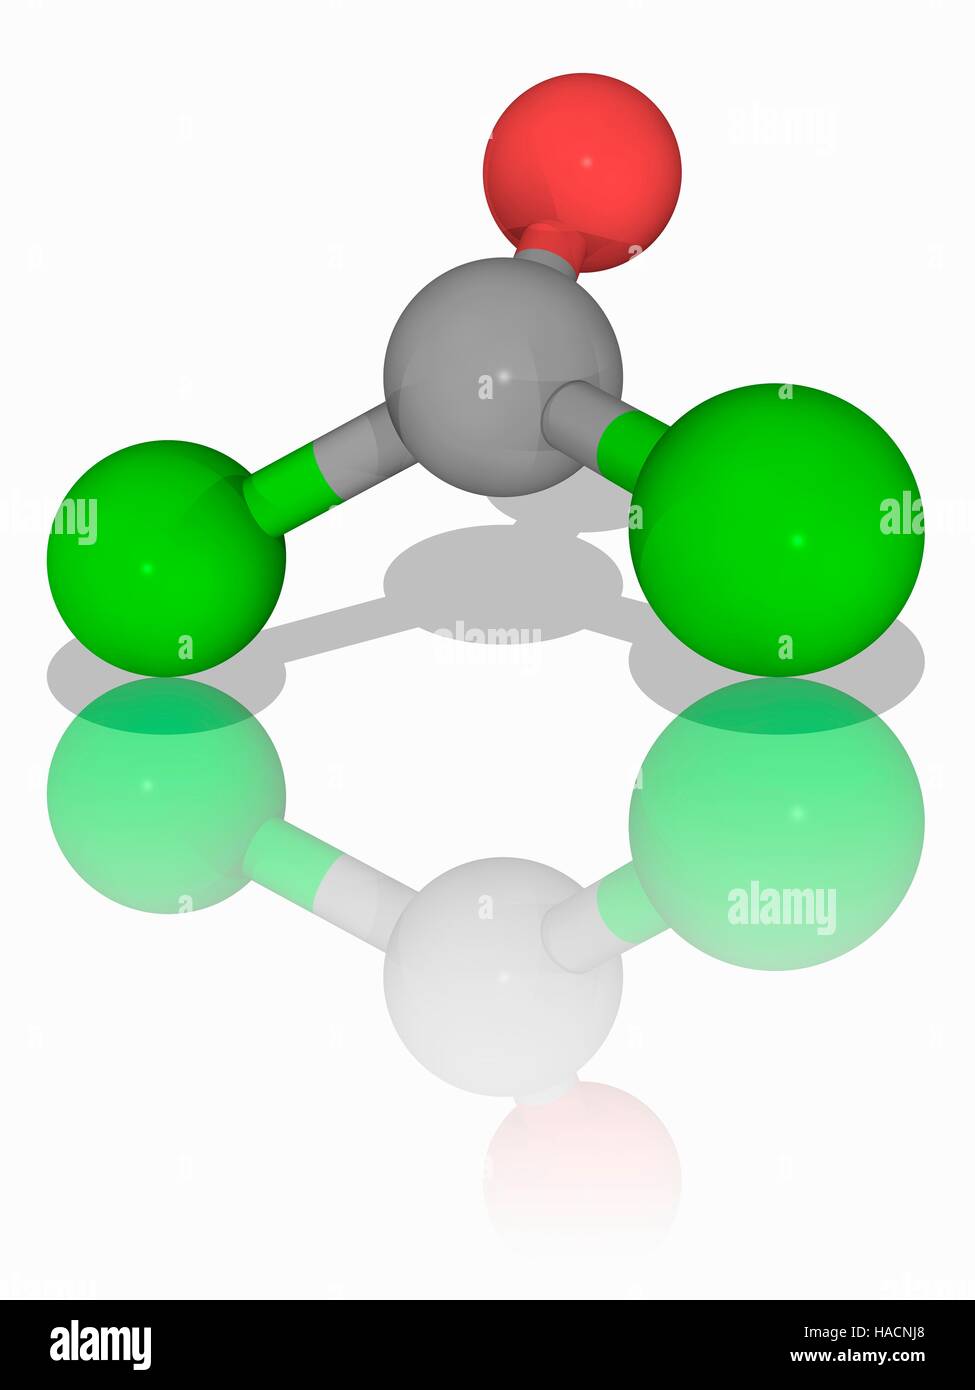 Phosgene. Molecular model of the inorganic compound phosgene (C.O.Cl2). A colourless gas, it killed tens of thousands during its use as a chemical weapon in World War I. It is an acyl chloride, oxohalide, and non-metal halide. Atoms are represented as spheres and are colour-coded: carbon (grey), oxygen (red) and chlorine (green). Illustration. Stock Photo